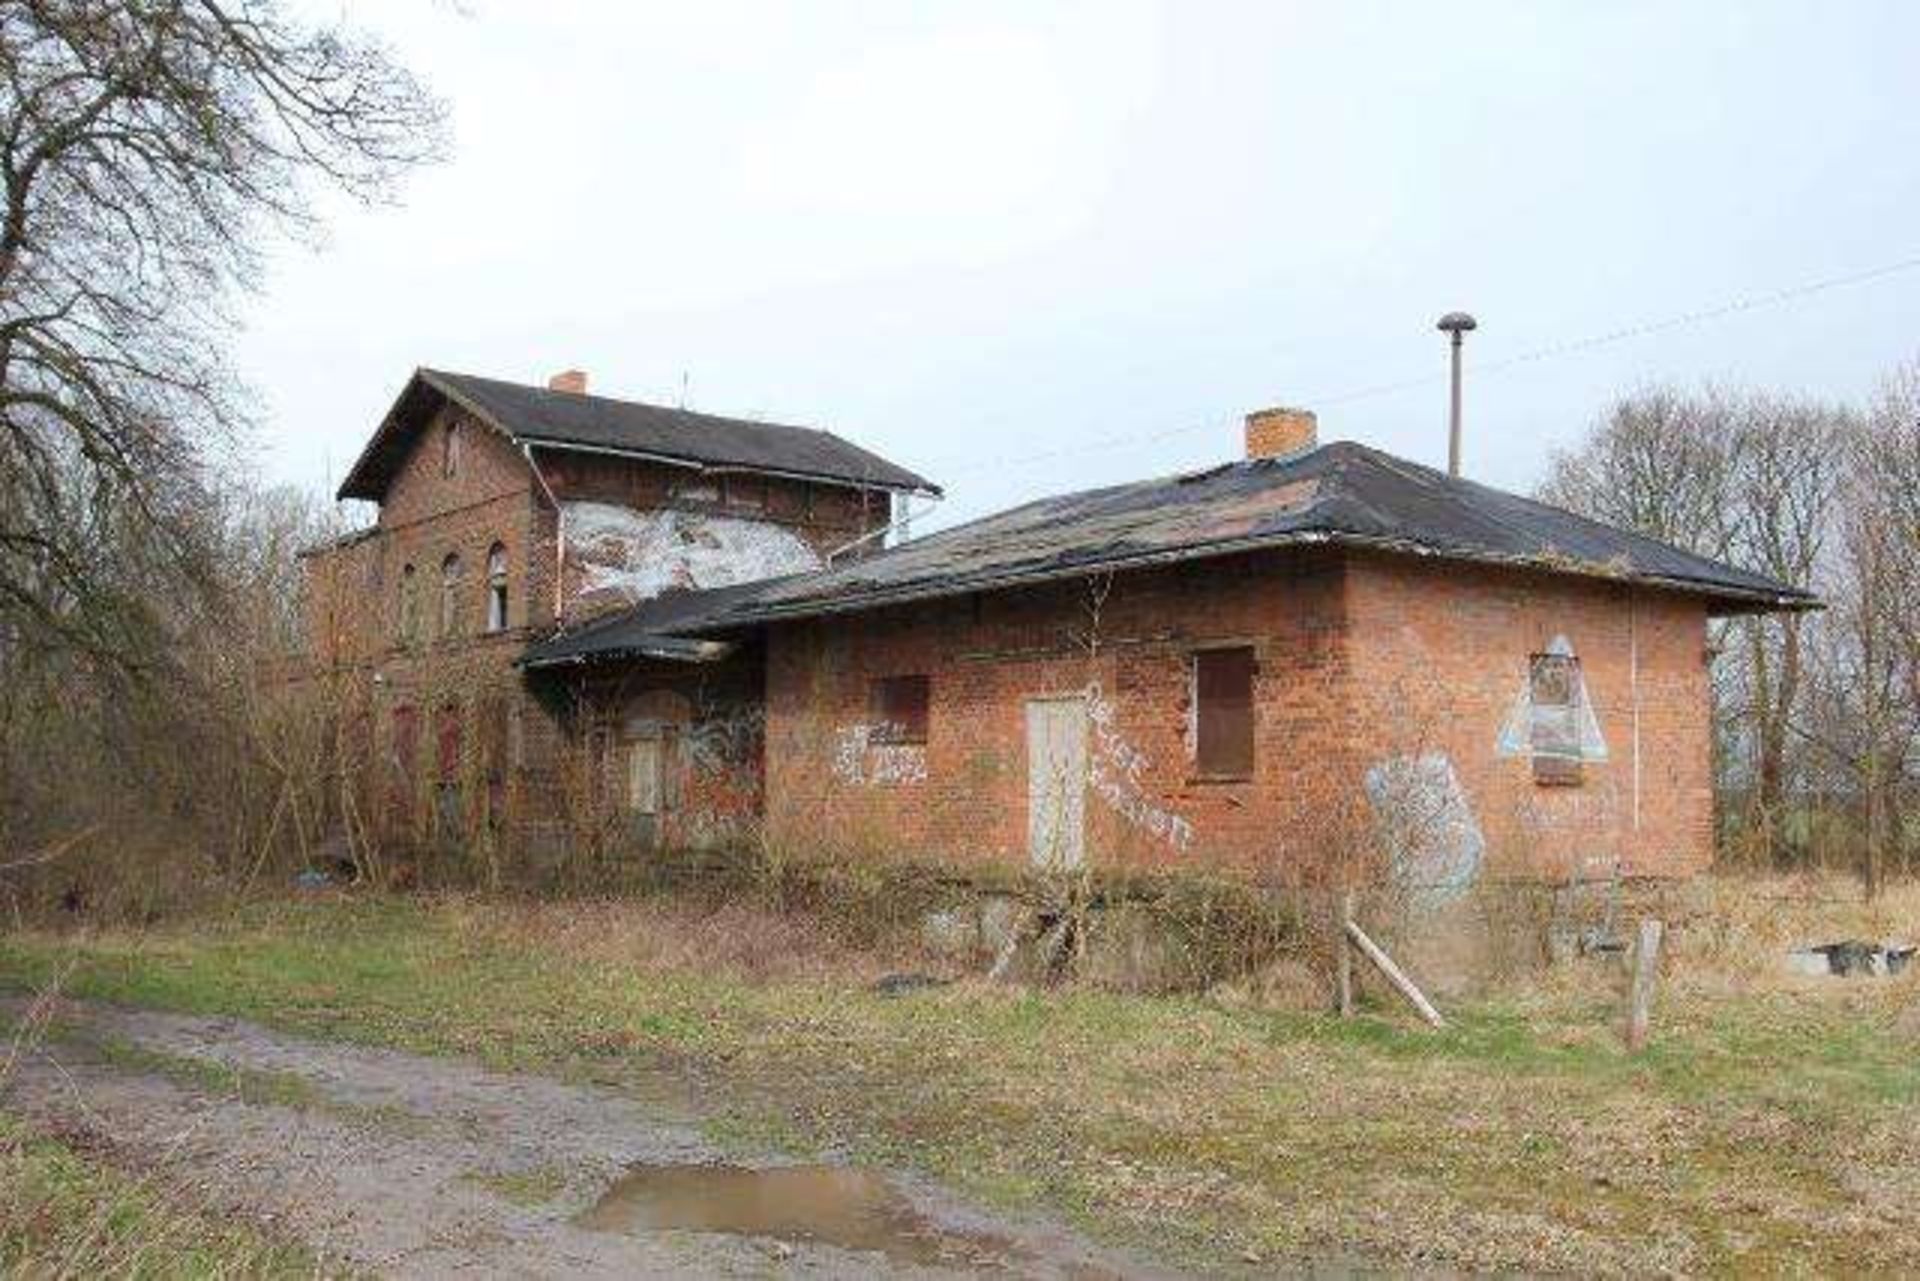 FORMER RAILWAY STATION, 3 BUILDINGS STANDING IN 4.8 ACRES !!! - Image 5 of 28